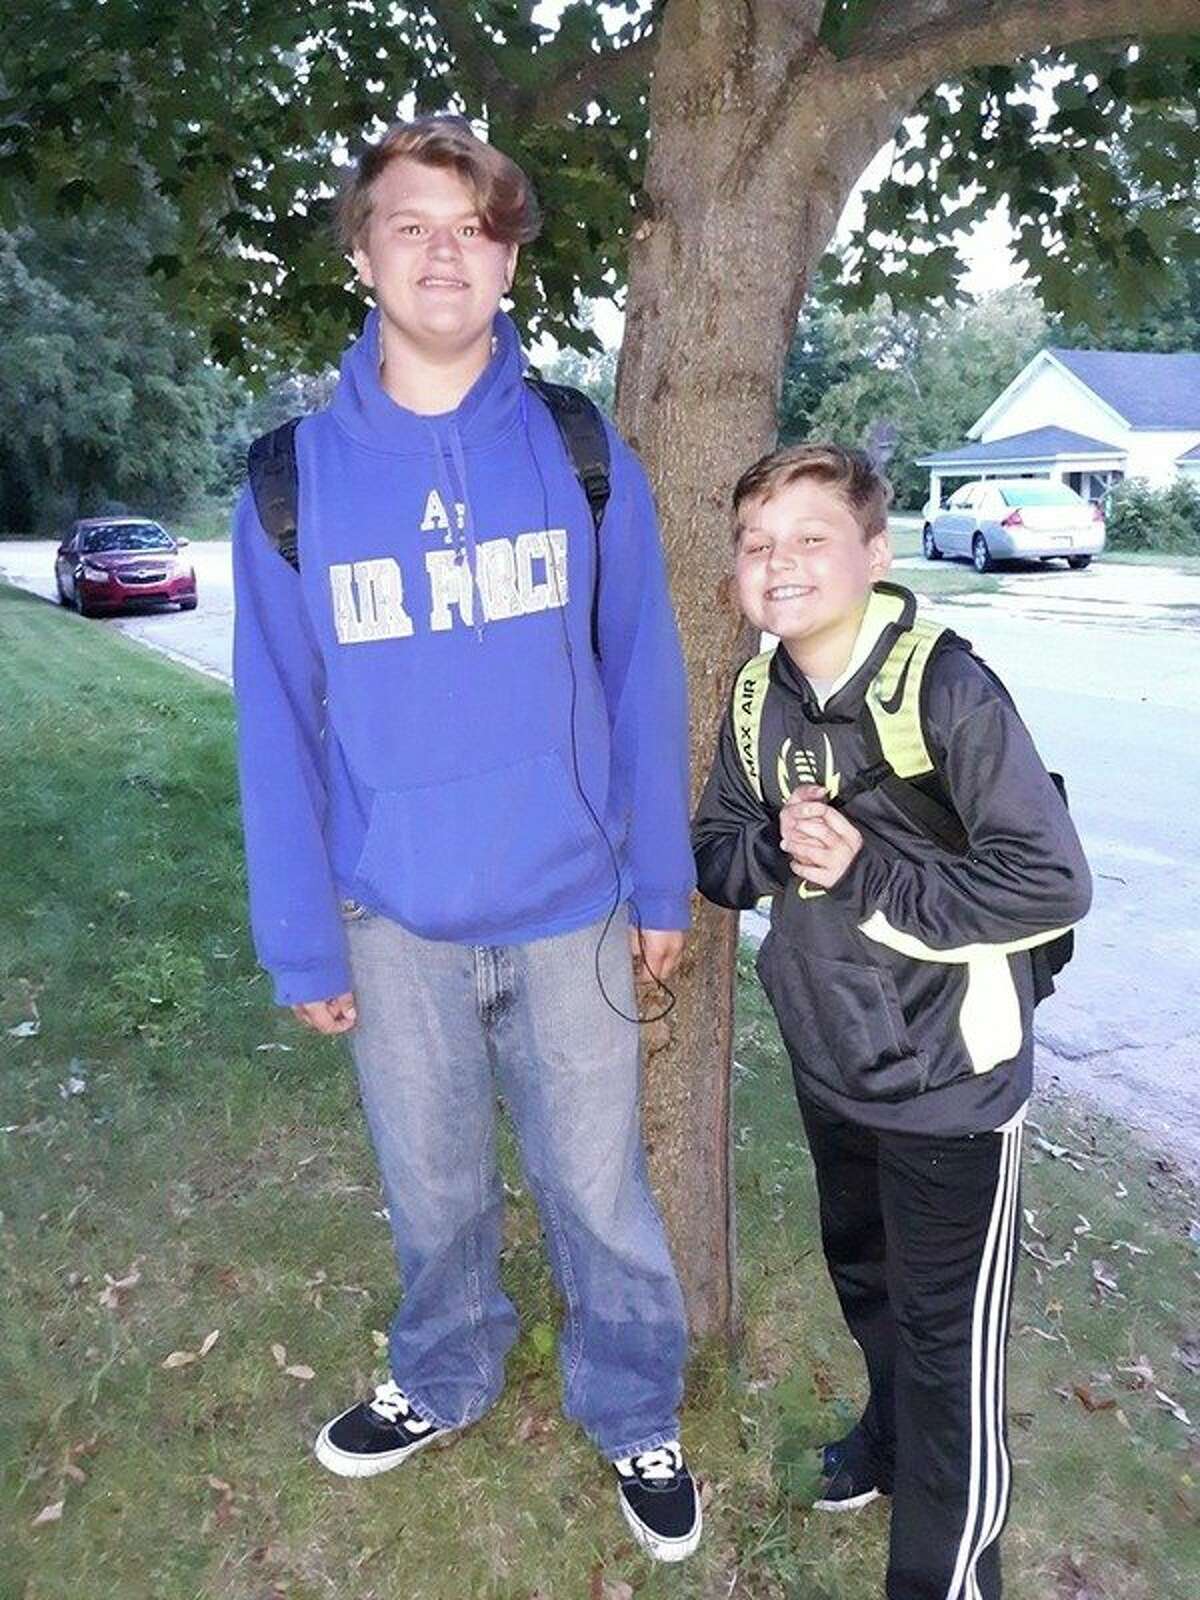 Michael Gross (left), 16, and his 12-year-old brother, Gage Gross, were located in the vicinity of the Charles E. Fairman Community Pool around 1:30 p.m. Wednesday by the Big Rapids Department of Public Safety after being reported missing Tuesday morning. The boys were unharmed and have been returned home. (Courtesy photo)